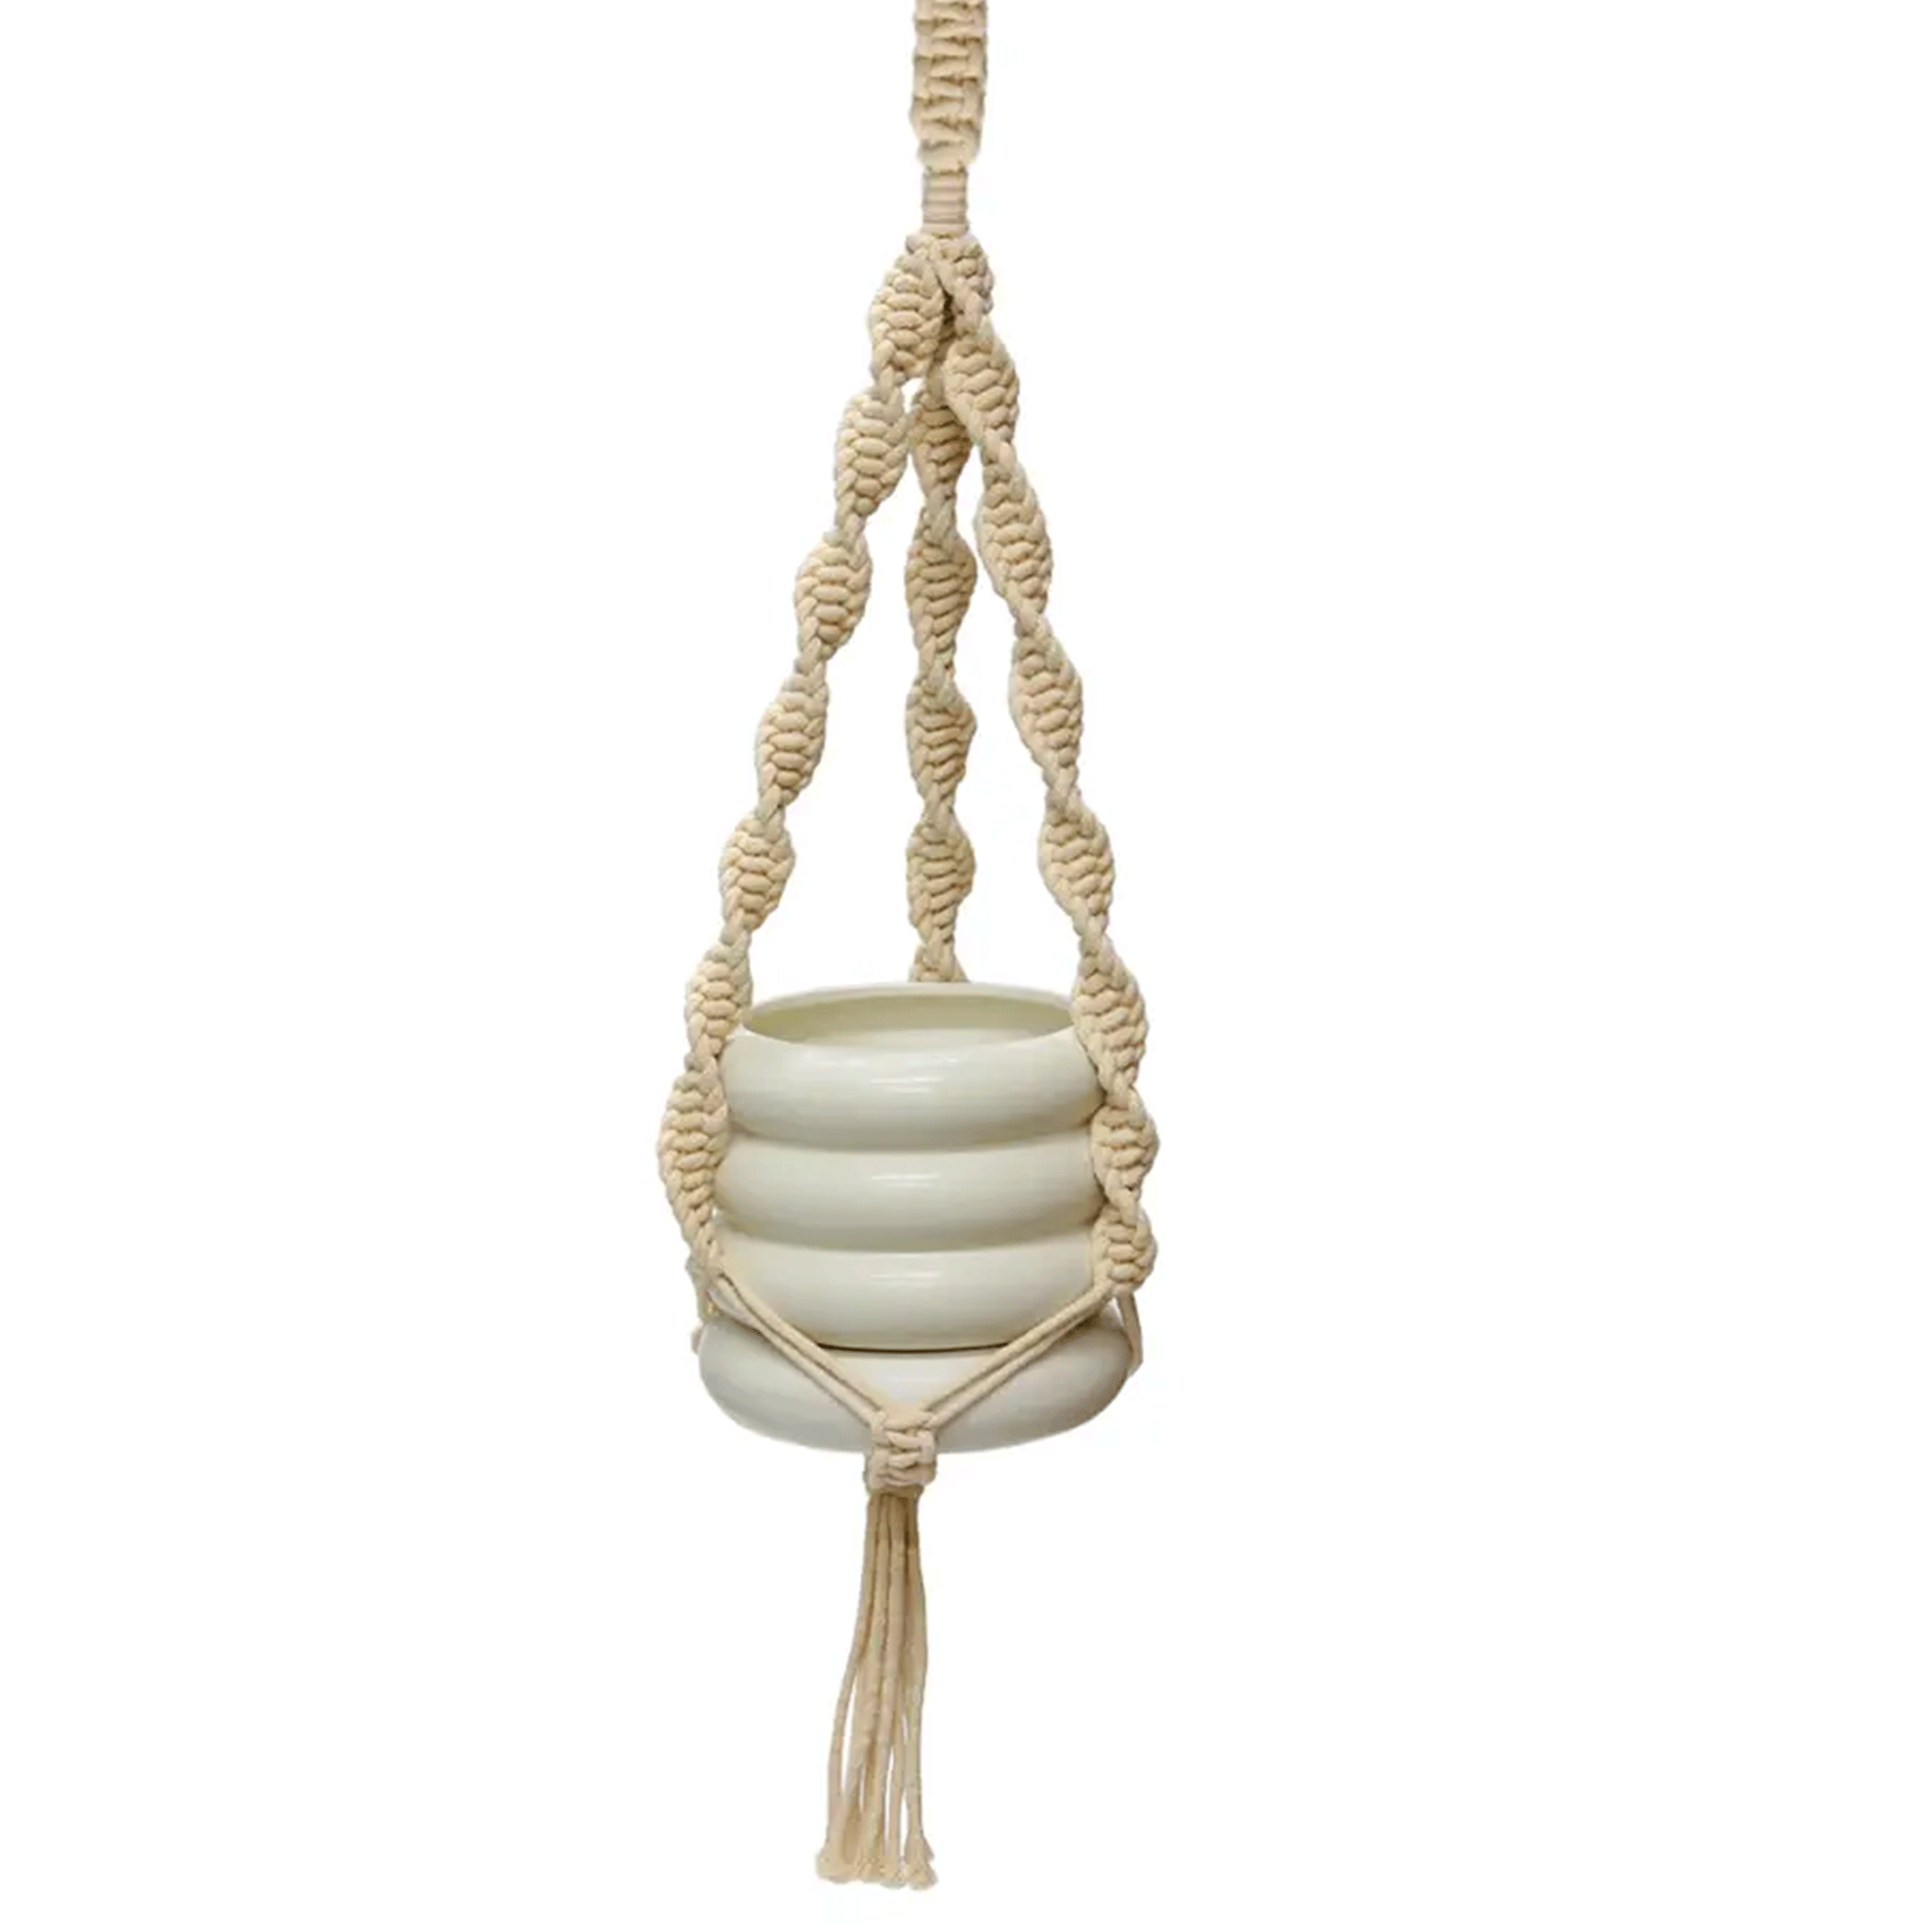 On a white background is a woven natural macrame plant hanger with a ceramic planter inside, not included with purchase. The macrame hanger has a twisted detail and a tassel bottom. 